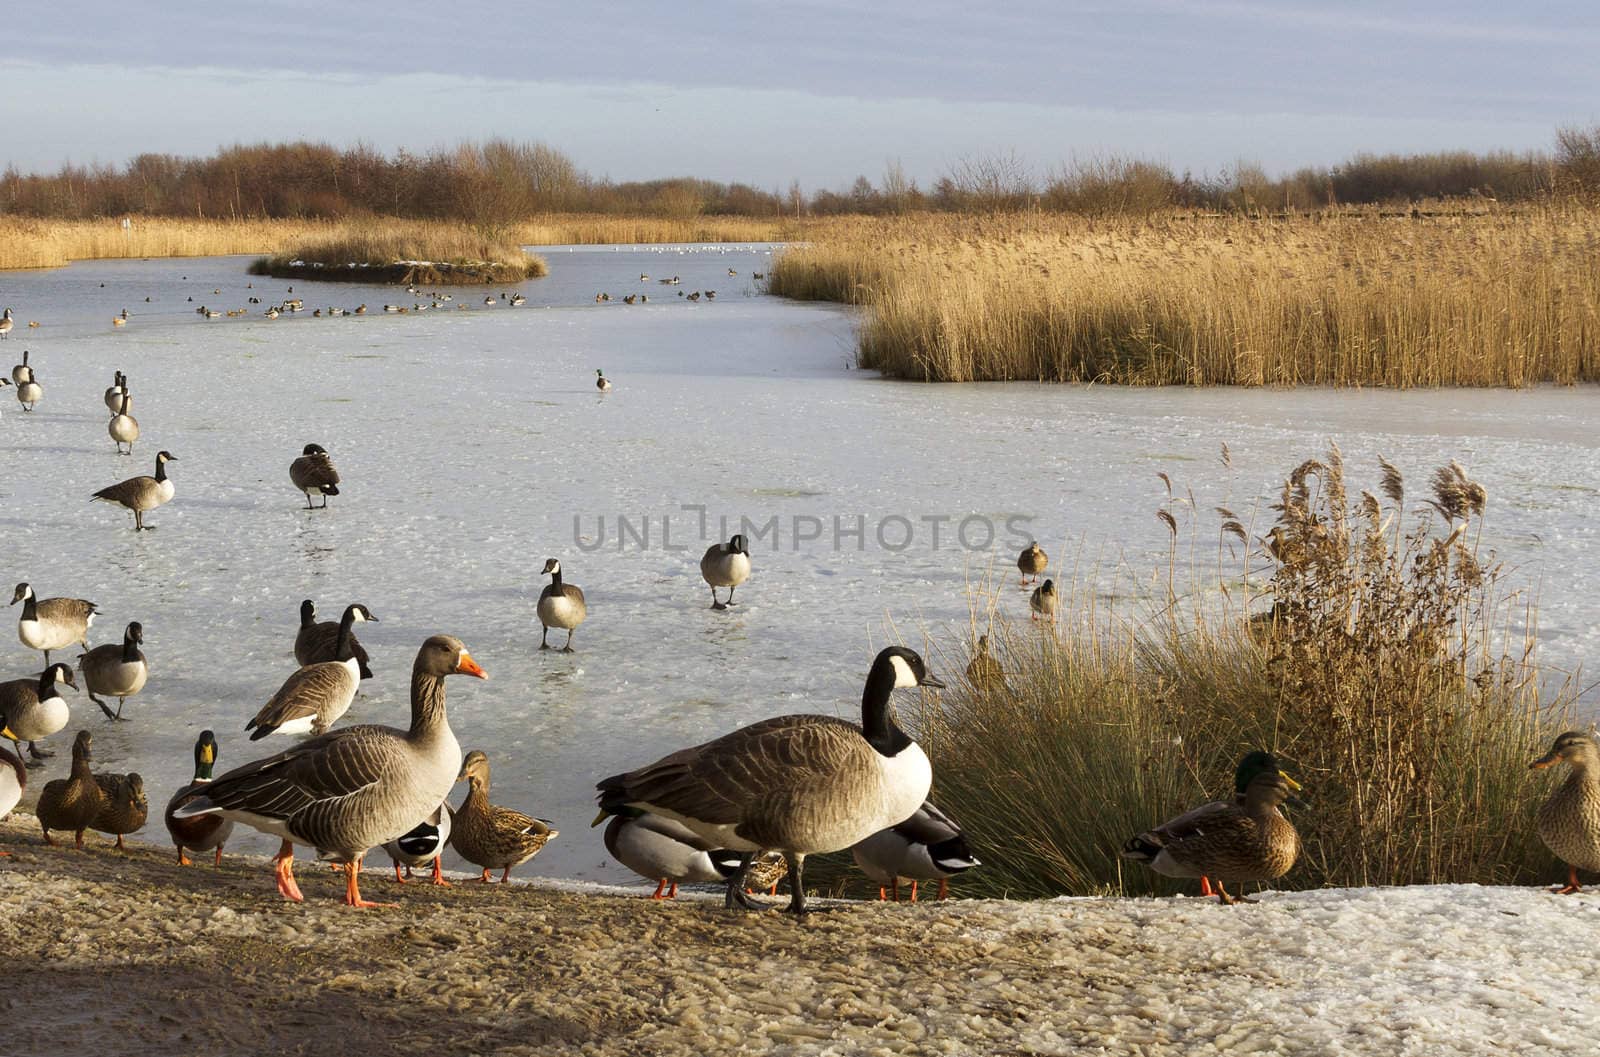 ducks and geese round a frozen pond